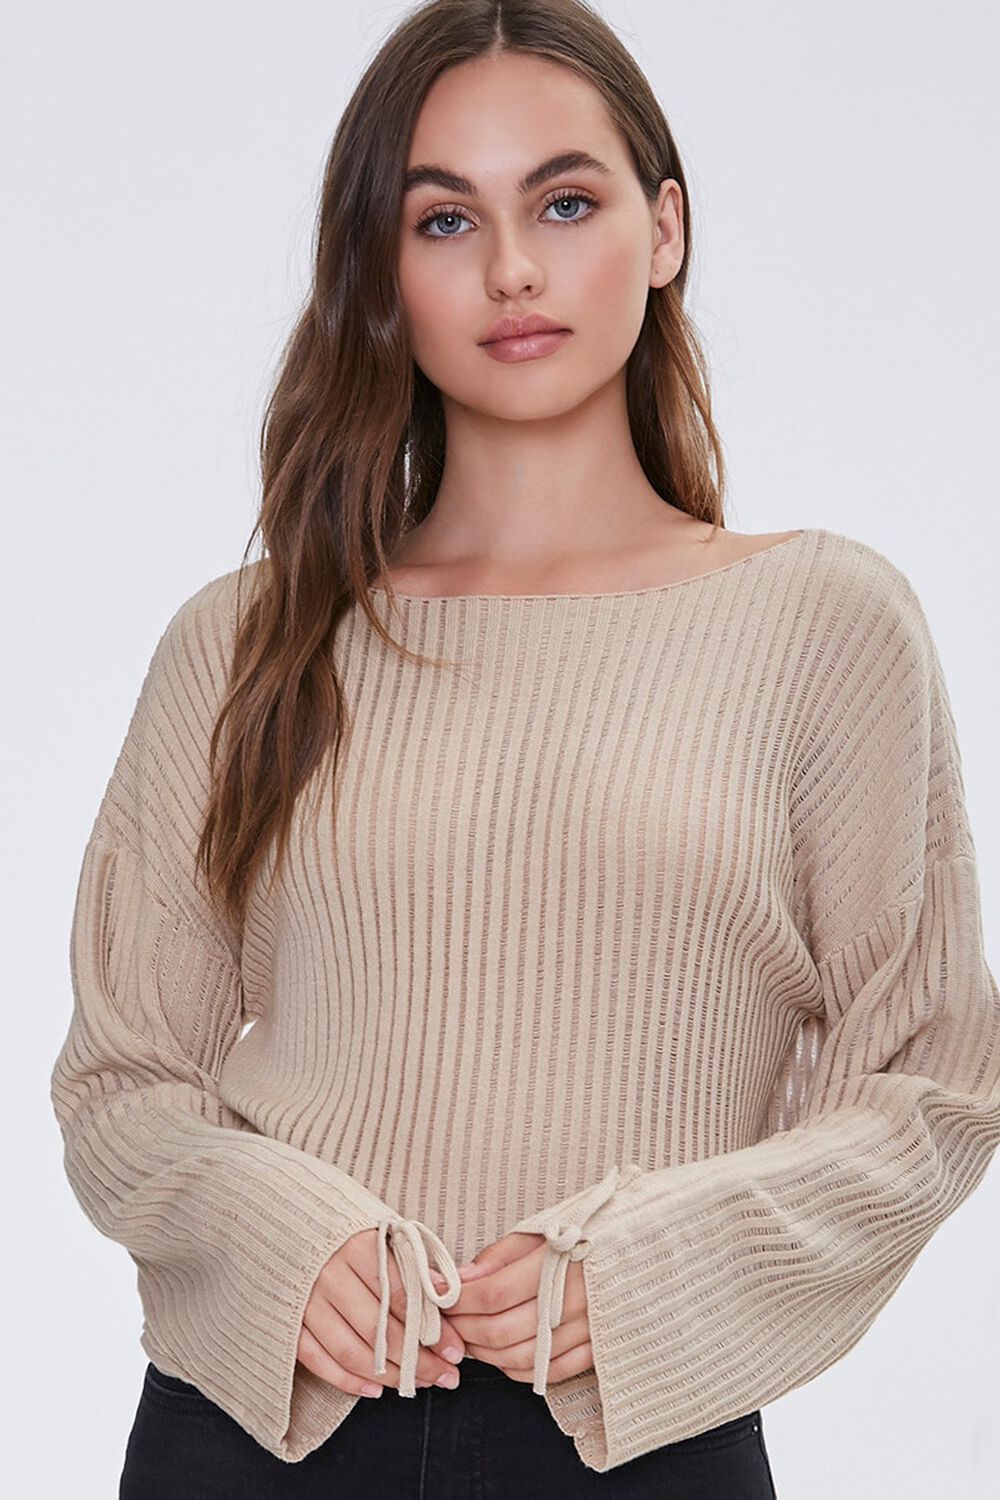 TAUPE Shadow-Striped Sweater, image 1